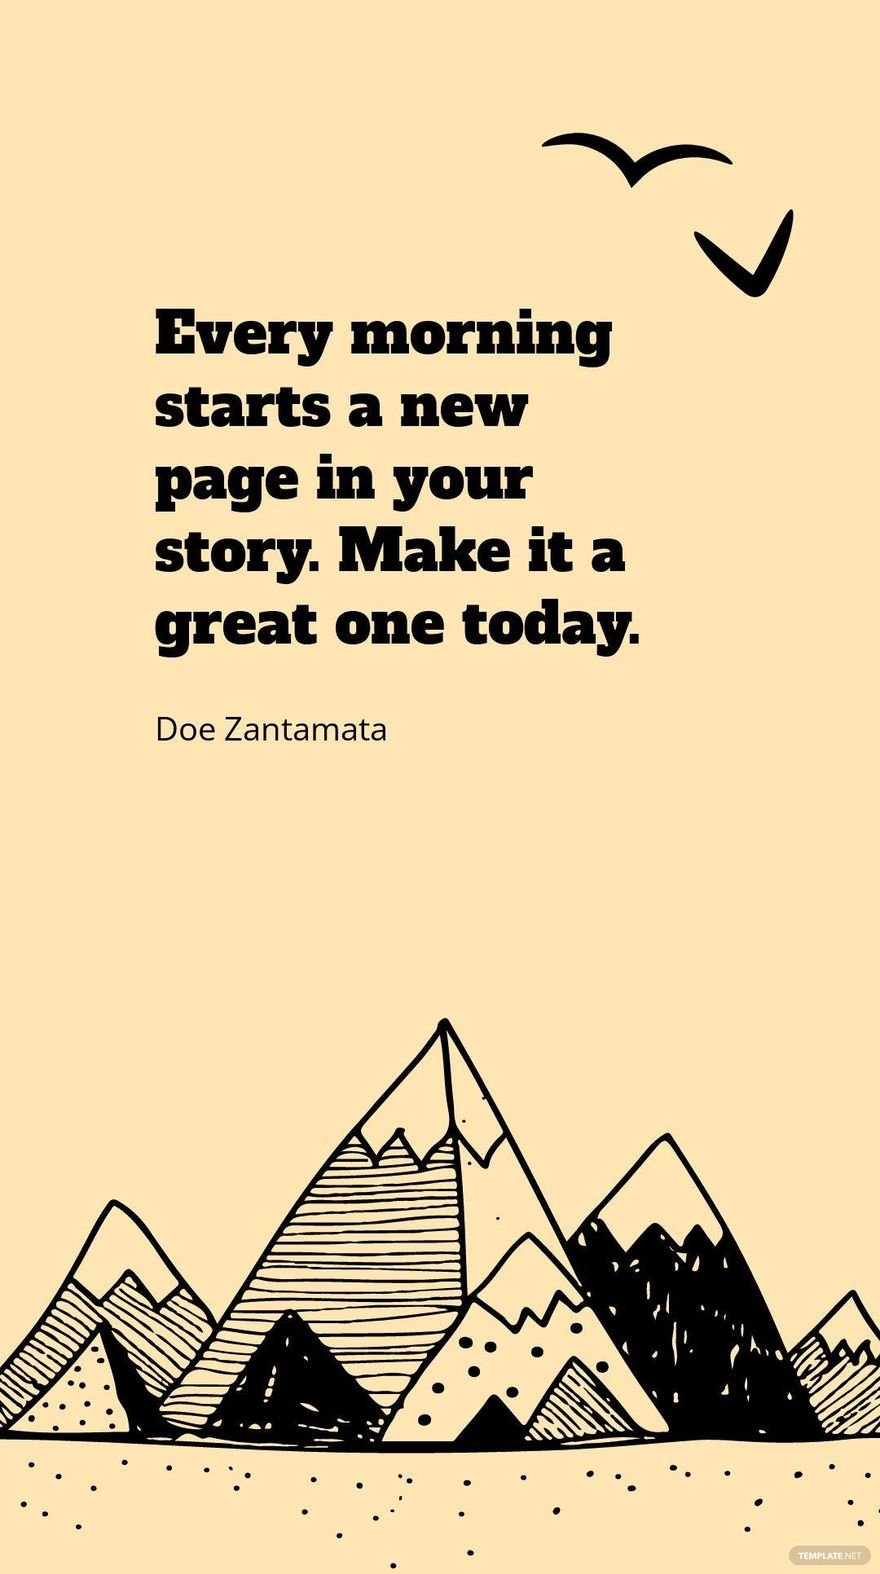 Doe Zantamata - Every morning starts a new page in your story. Make it a great one today.